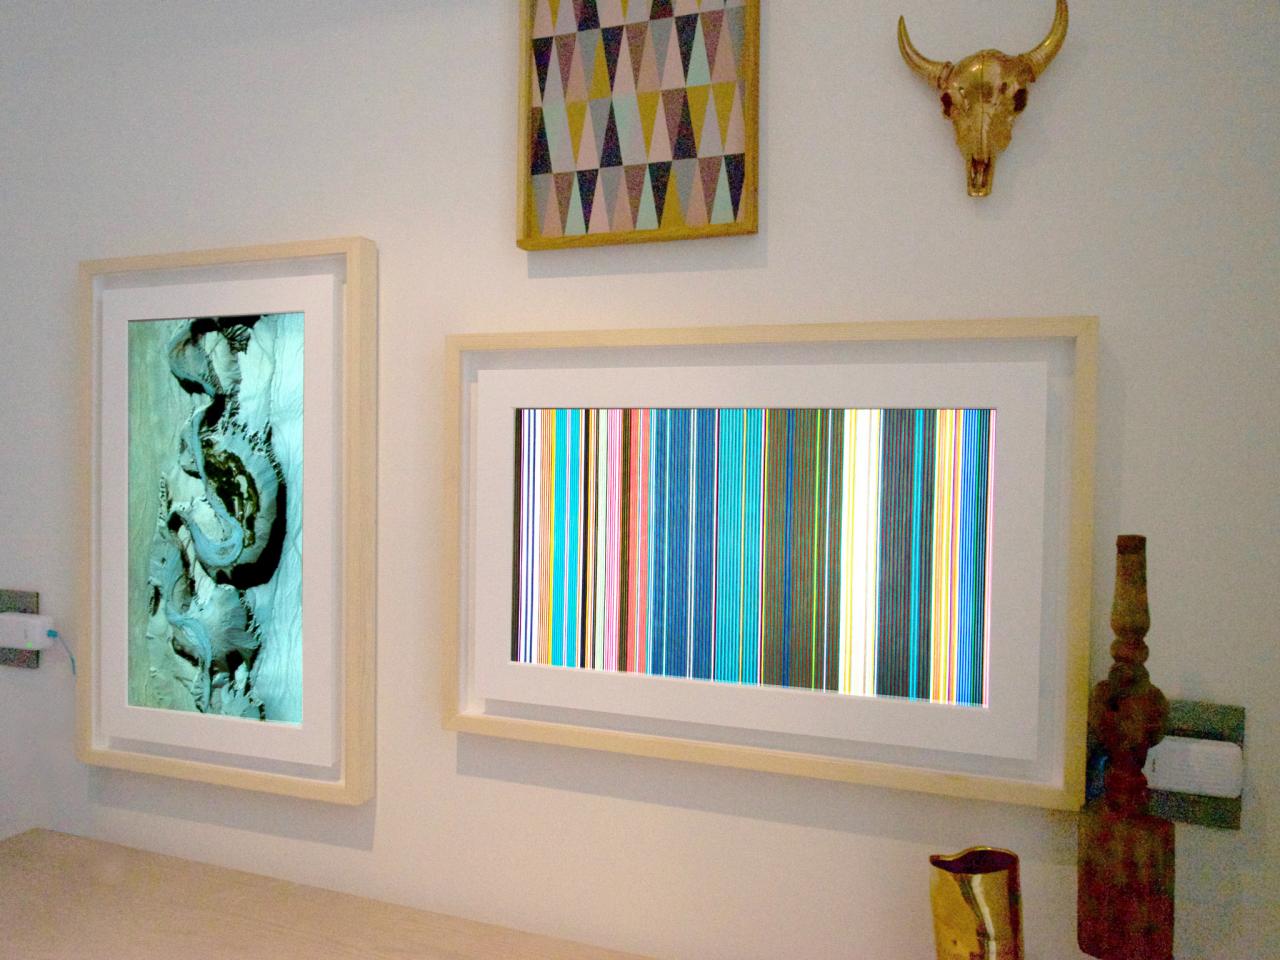 Digital Picture Frames Have Grown Up Into Wall Art | HGTV Smart Home